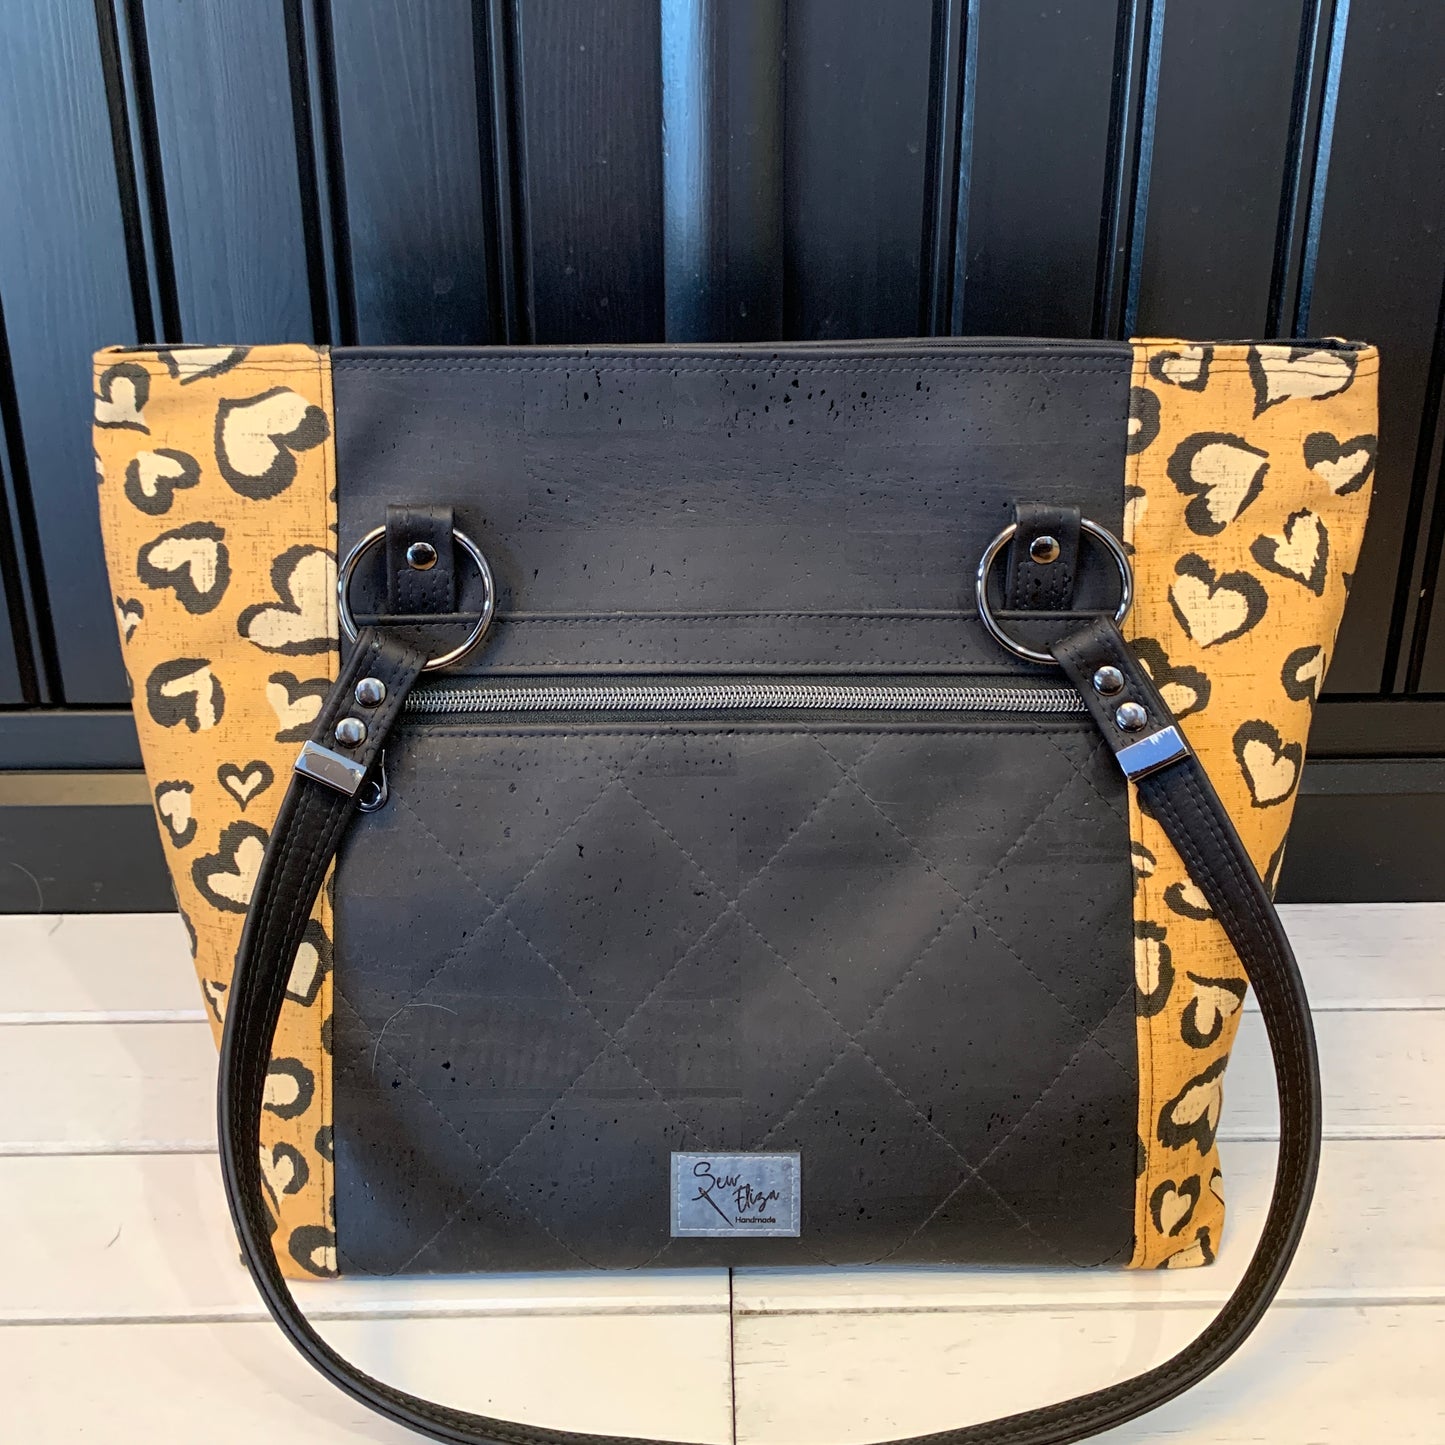 Muerqo Tote - Leopard Heart Canvas and Black Cork